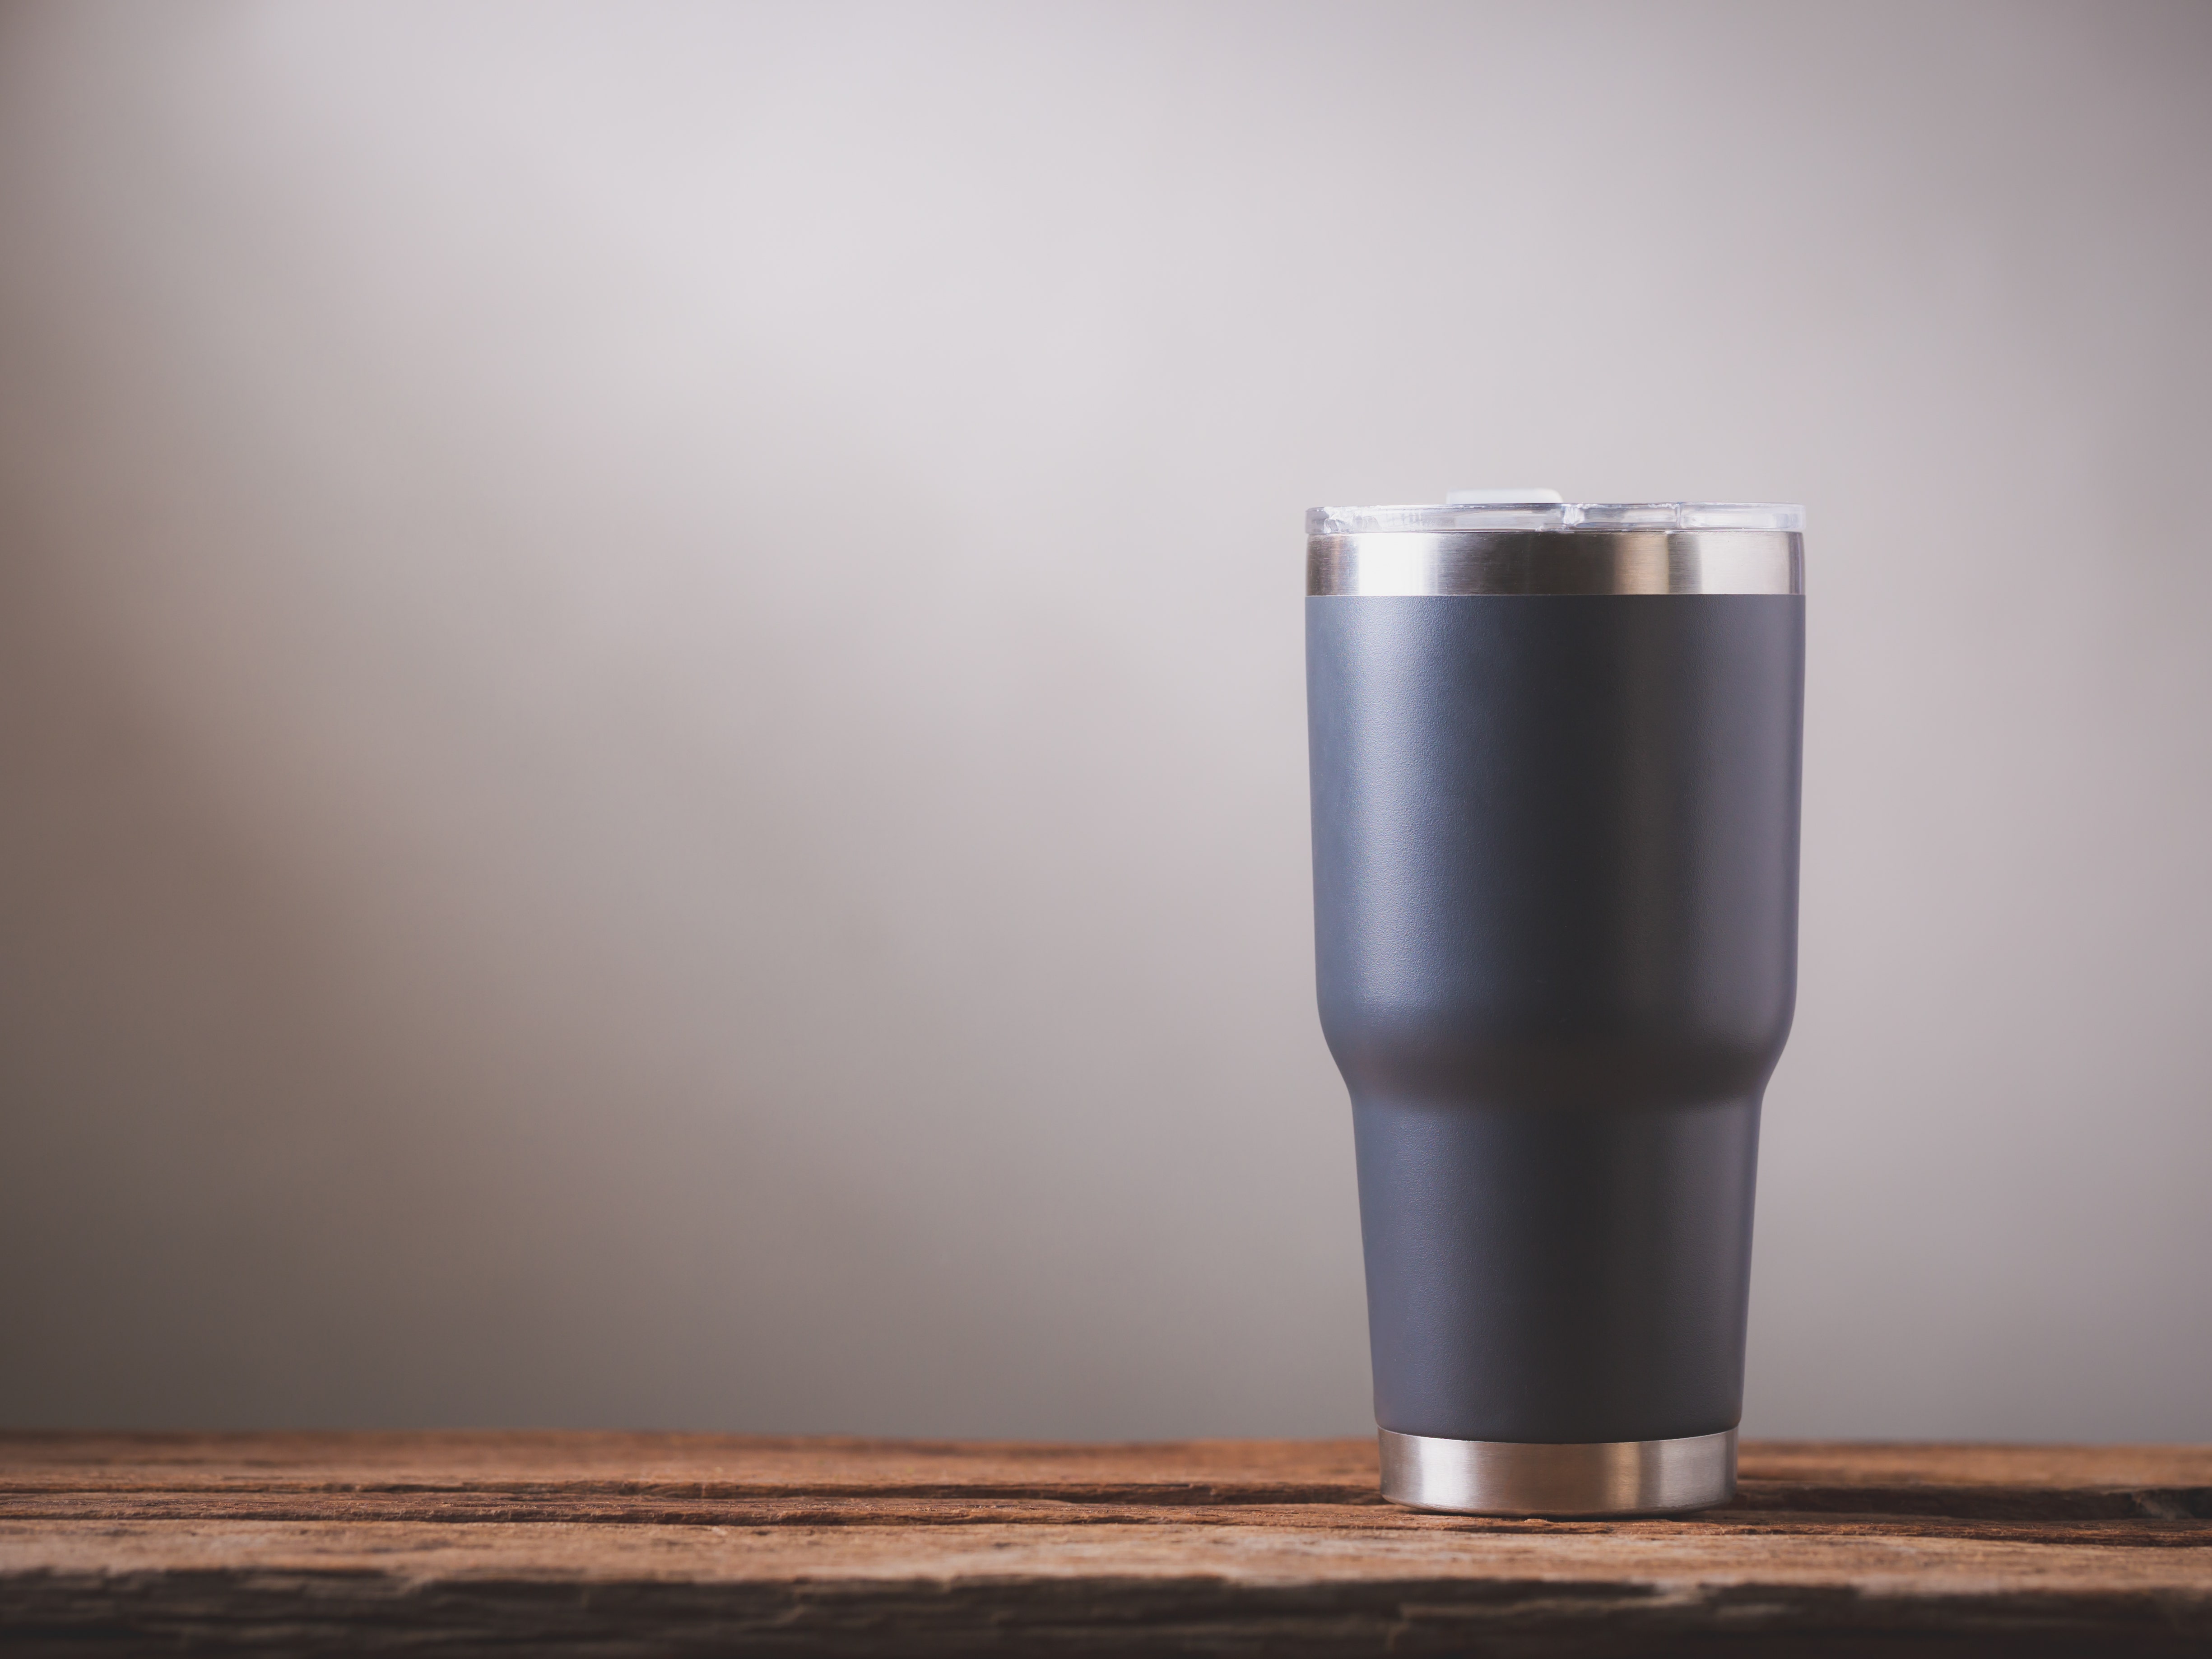 launches rare YETI sale with up to 50% off steel tumblers